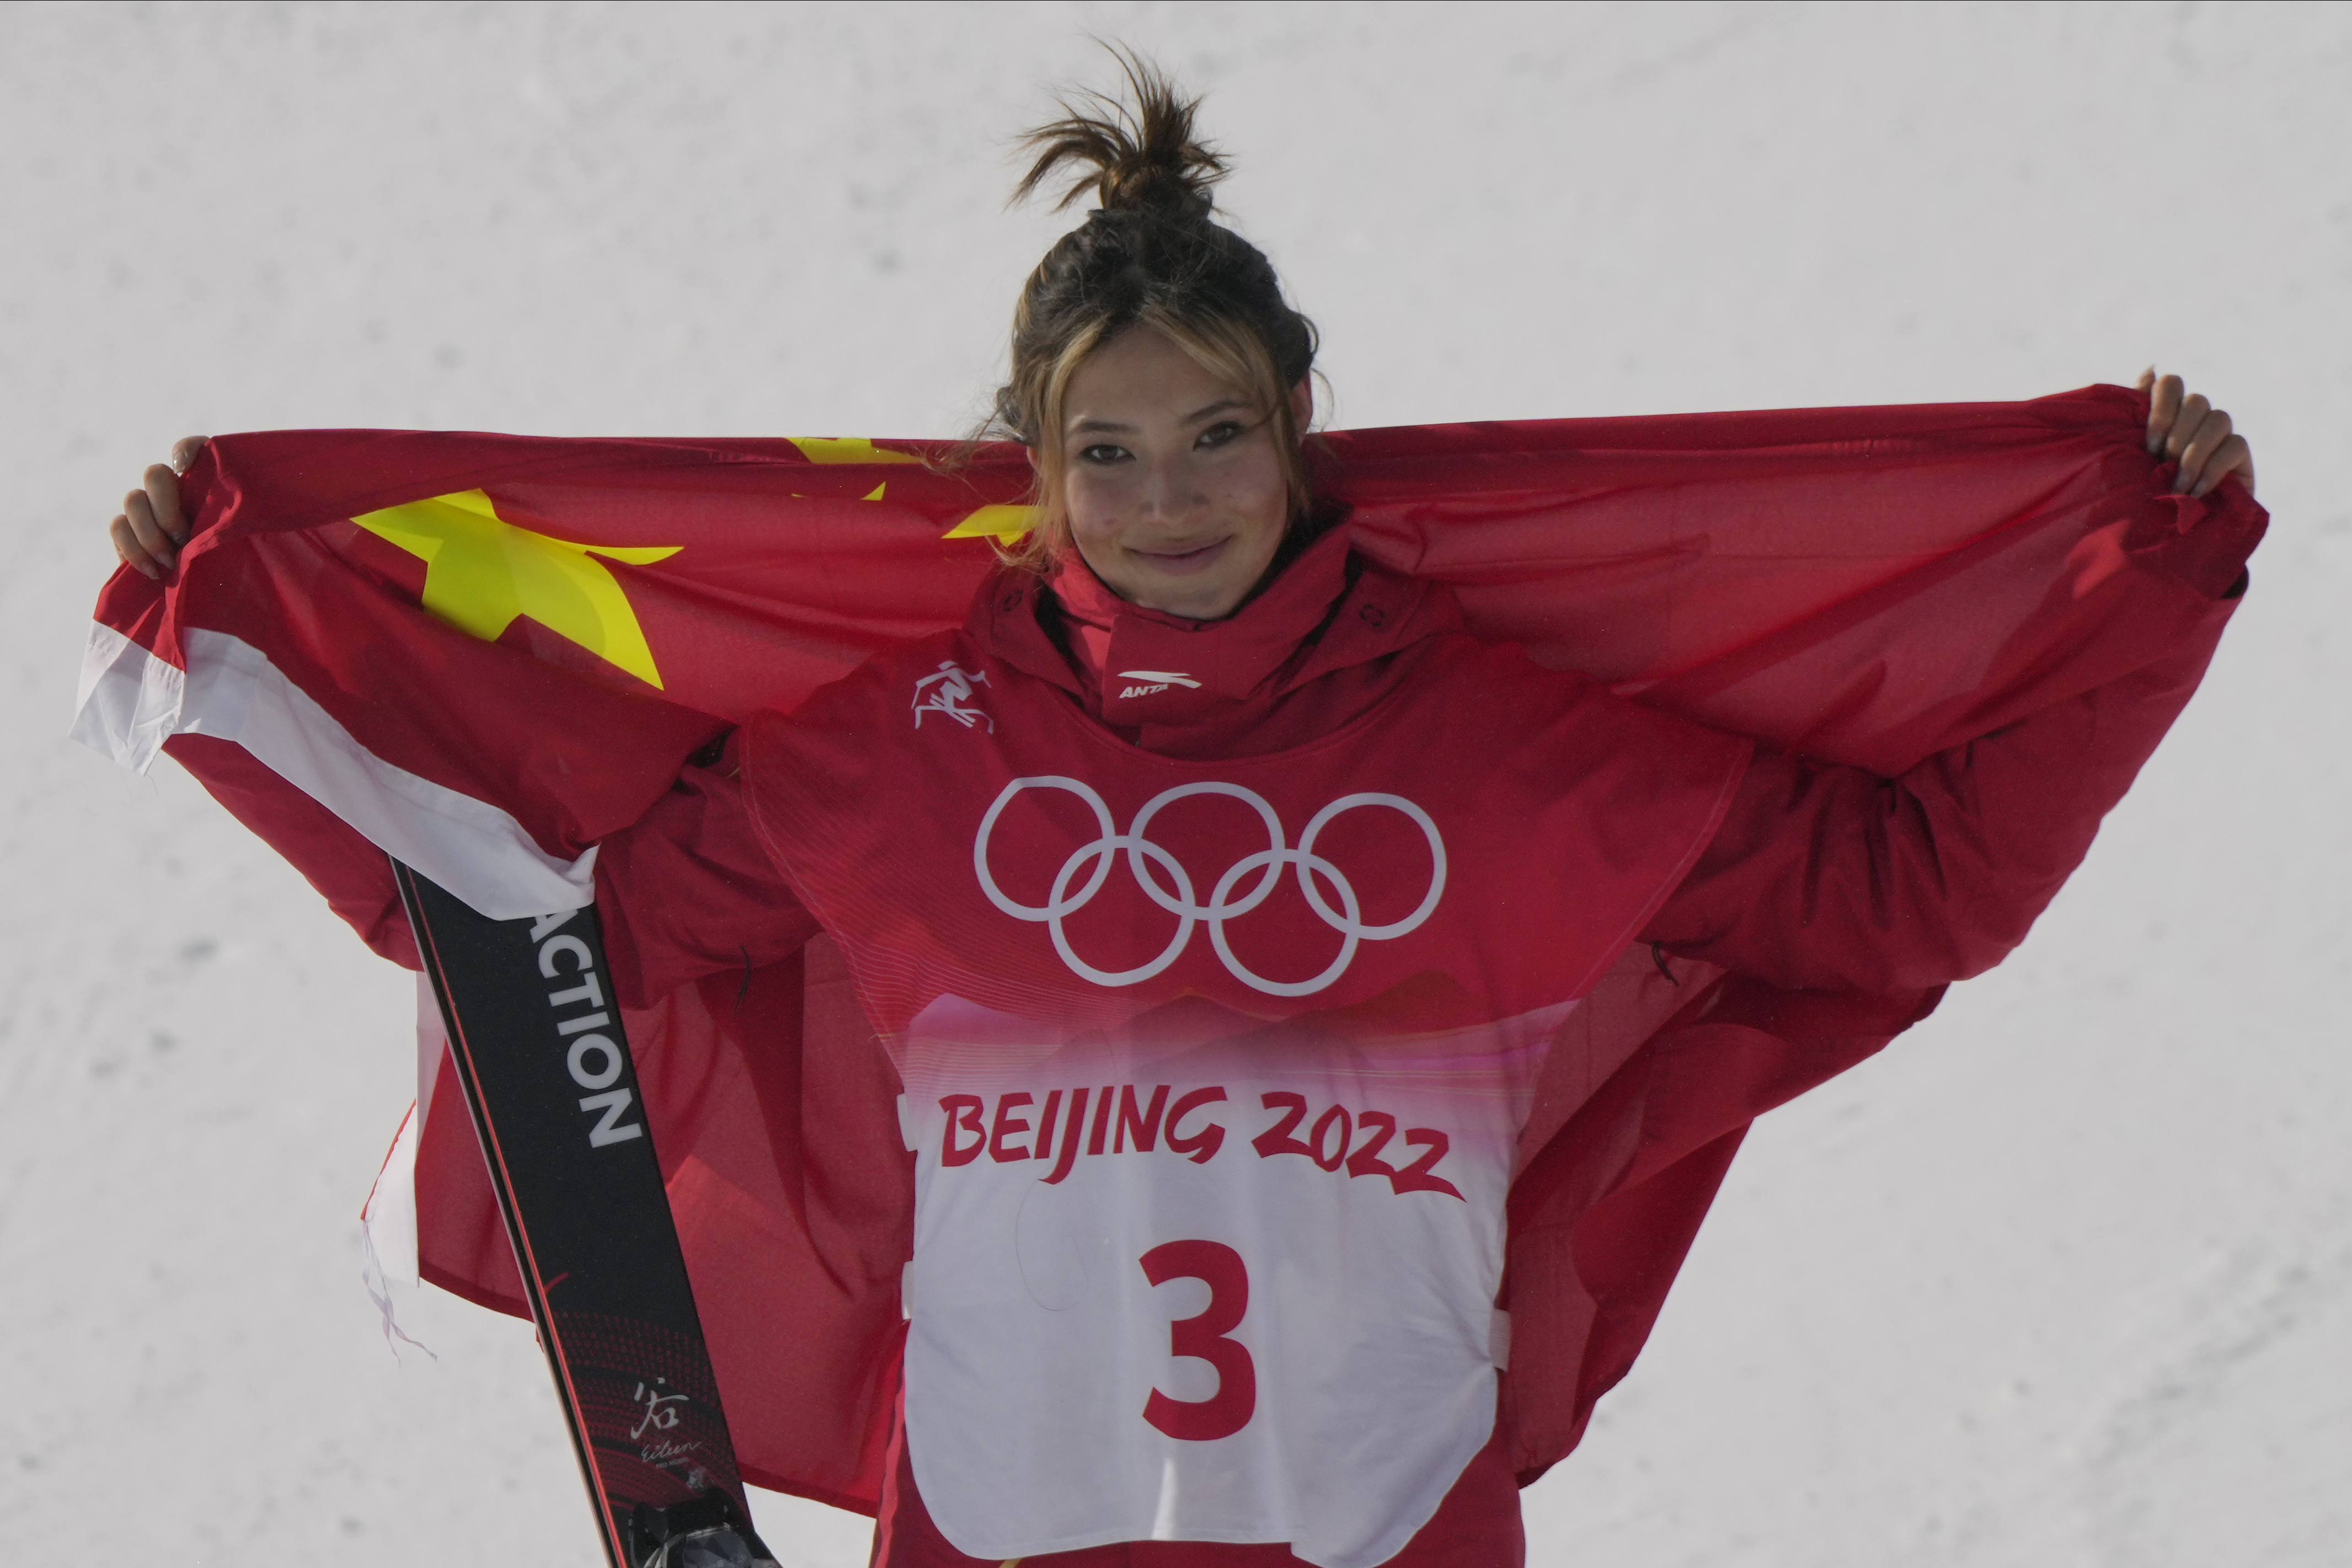 Who Is Chinese Freestyle Skier Eileen Gu? Meet The Model Everyone Is  Talking About